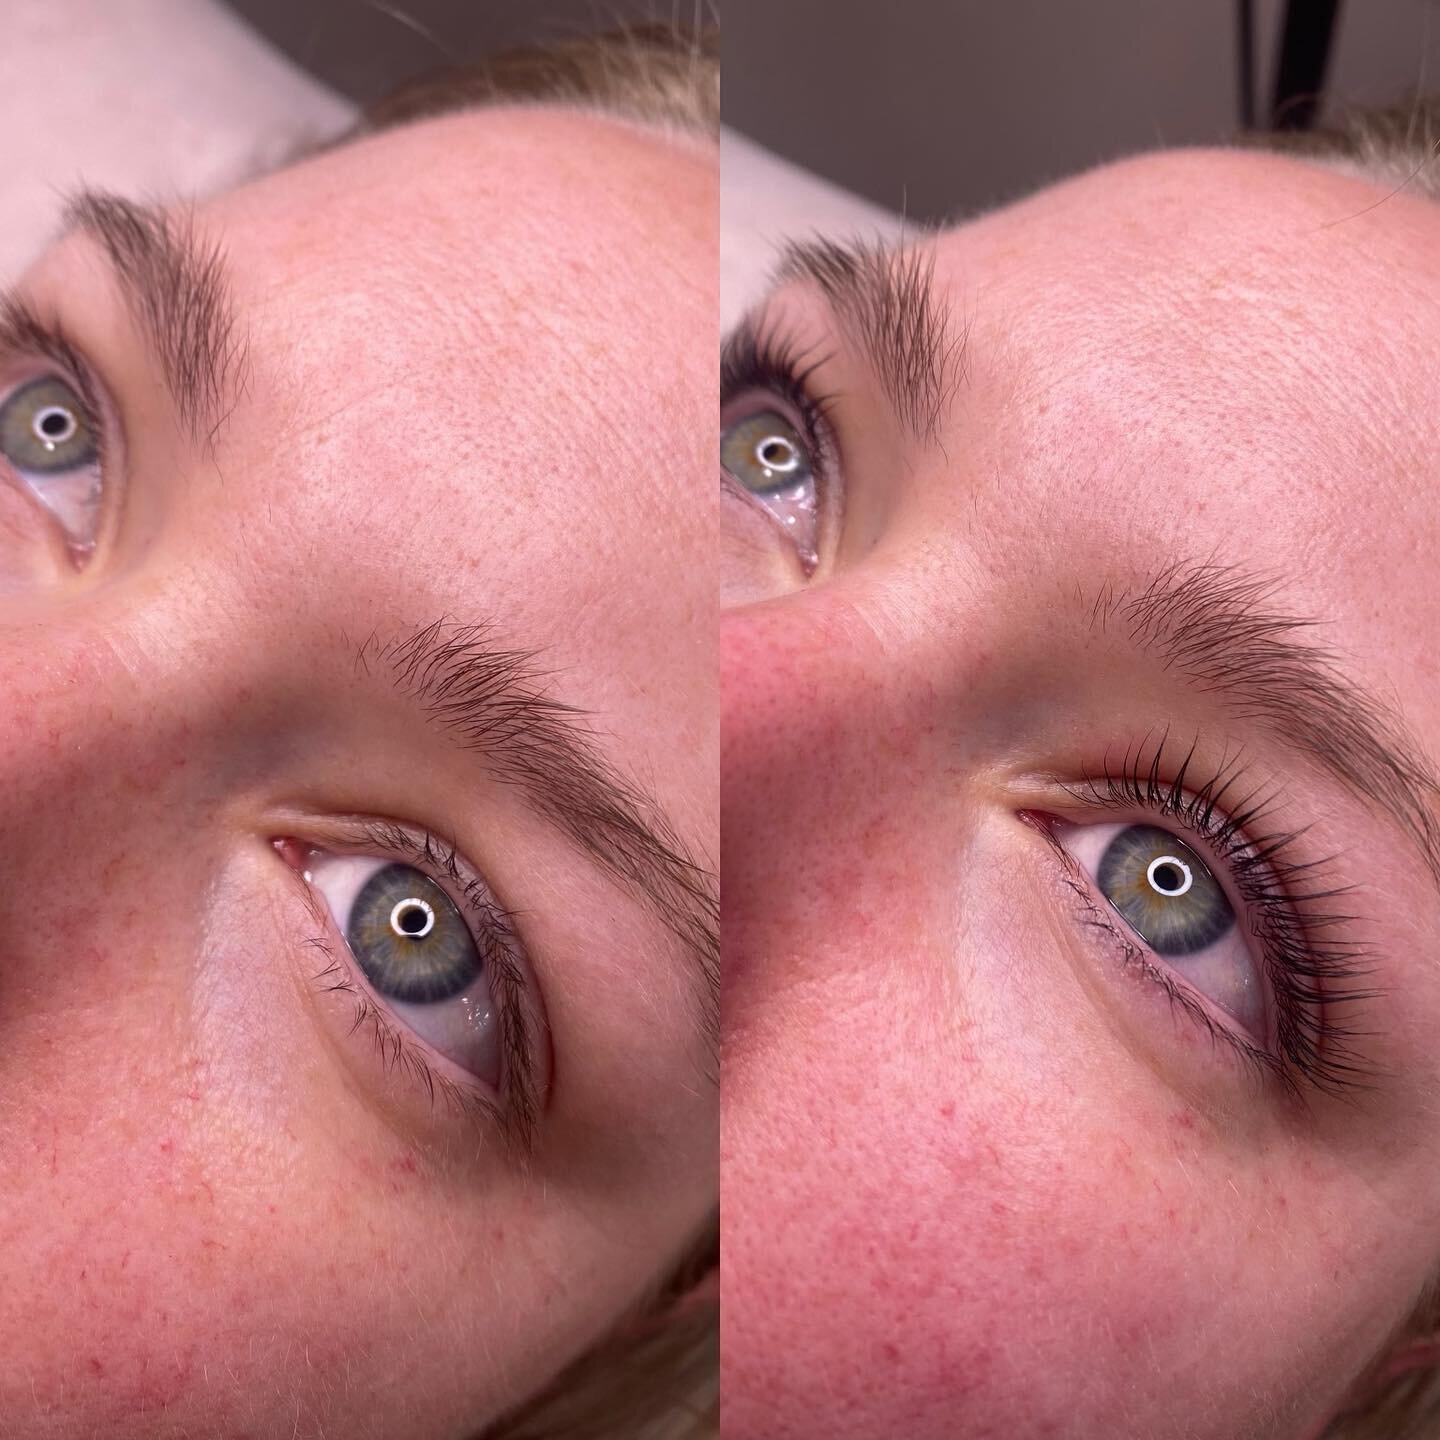 Lash lift by Natalie ✨

It is amazing how much a lash lift can open up your eyes!

Our lash lifts all include what some salons refer to as &ldquo;lash filler&rdquo;. This is a vegan, plant based treatment which deeply conditions and strengthens the n